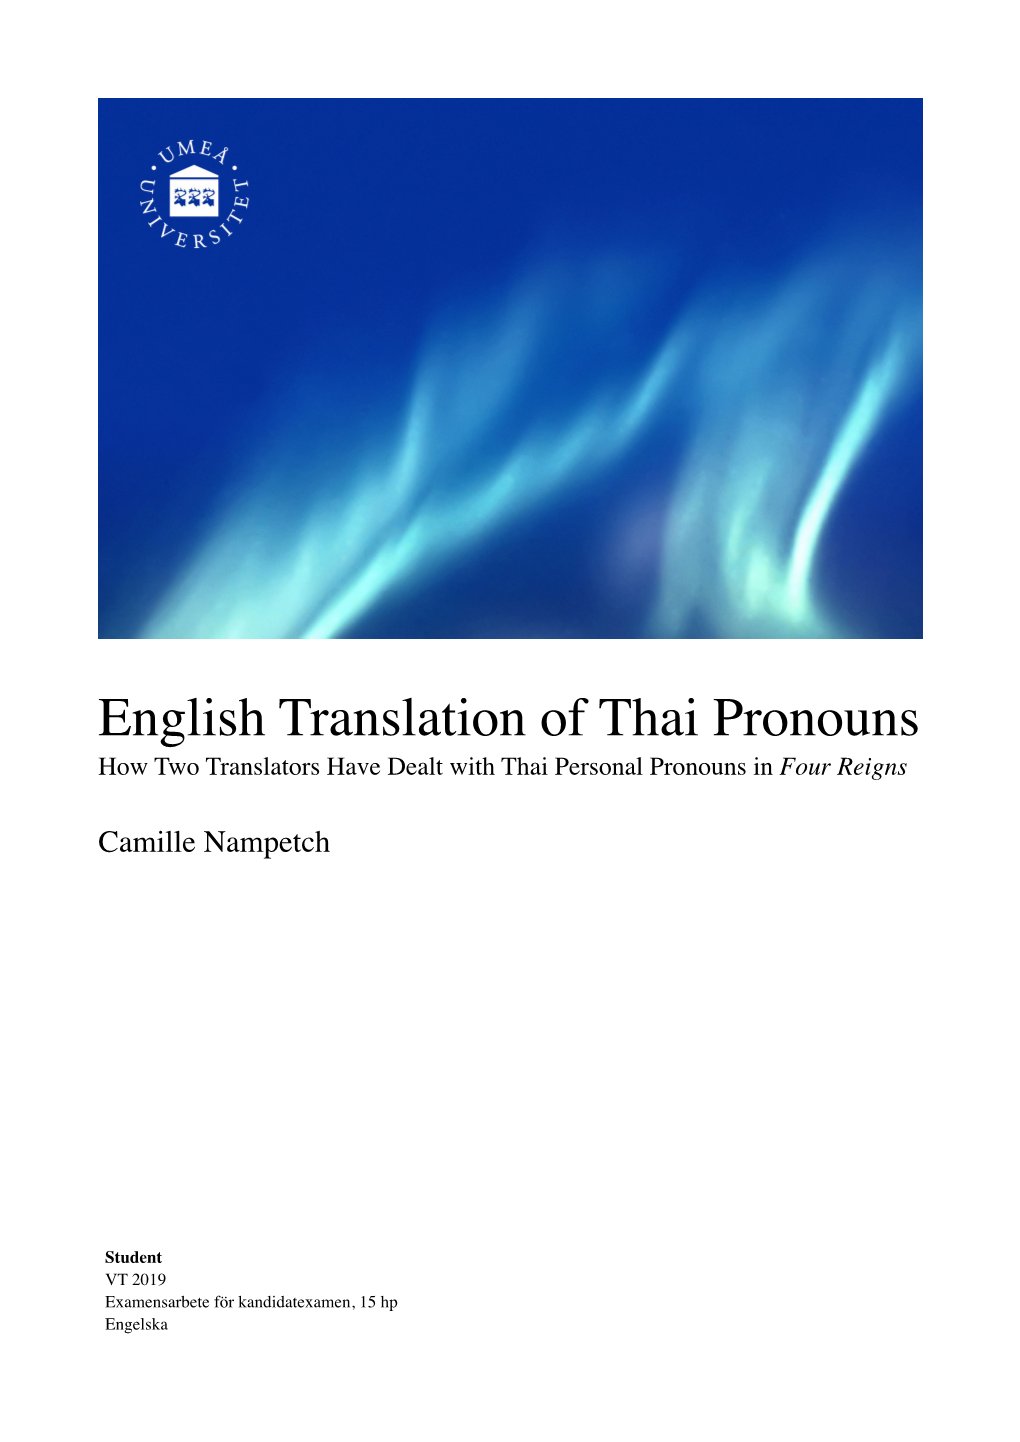 English Translation of Thai Pronouns How Two Translators Have Dealt with Thai Personal Pronouns in Four Reigns